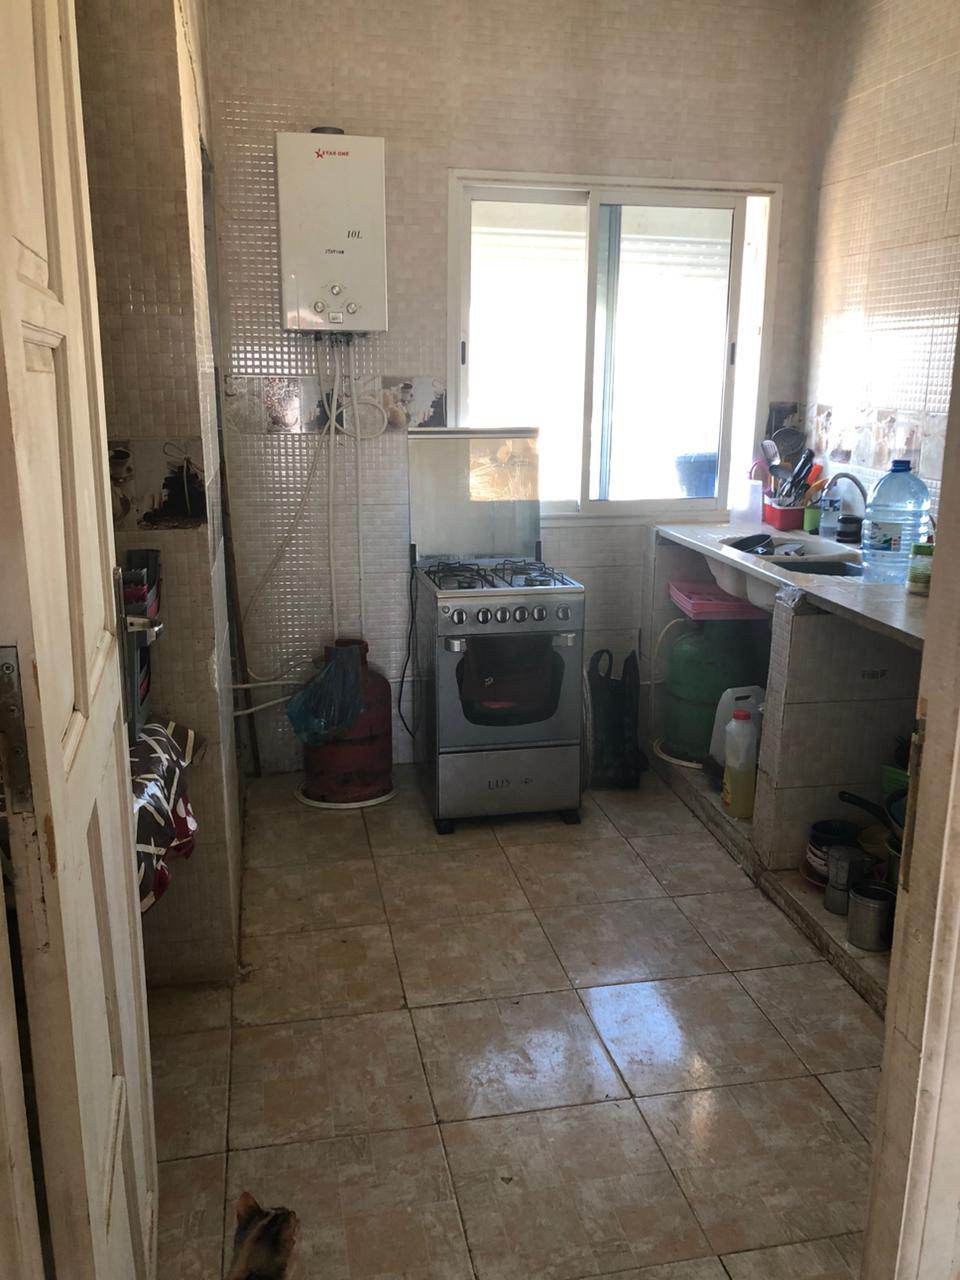 Ezzouhour (Tunis) Ezzouhour 4 Vente Appart. 2 pices Appartement  agrable